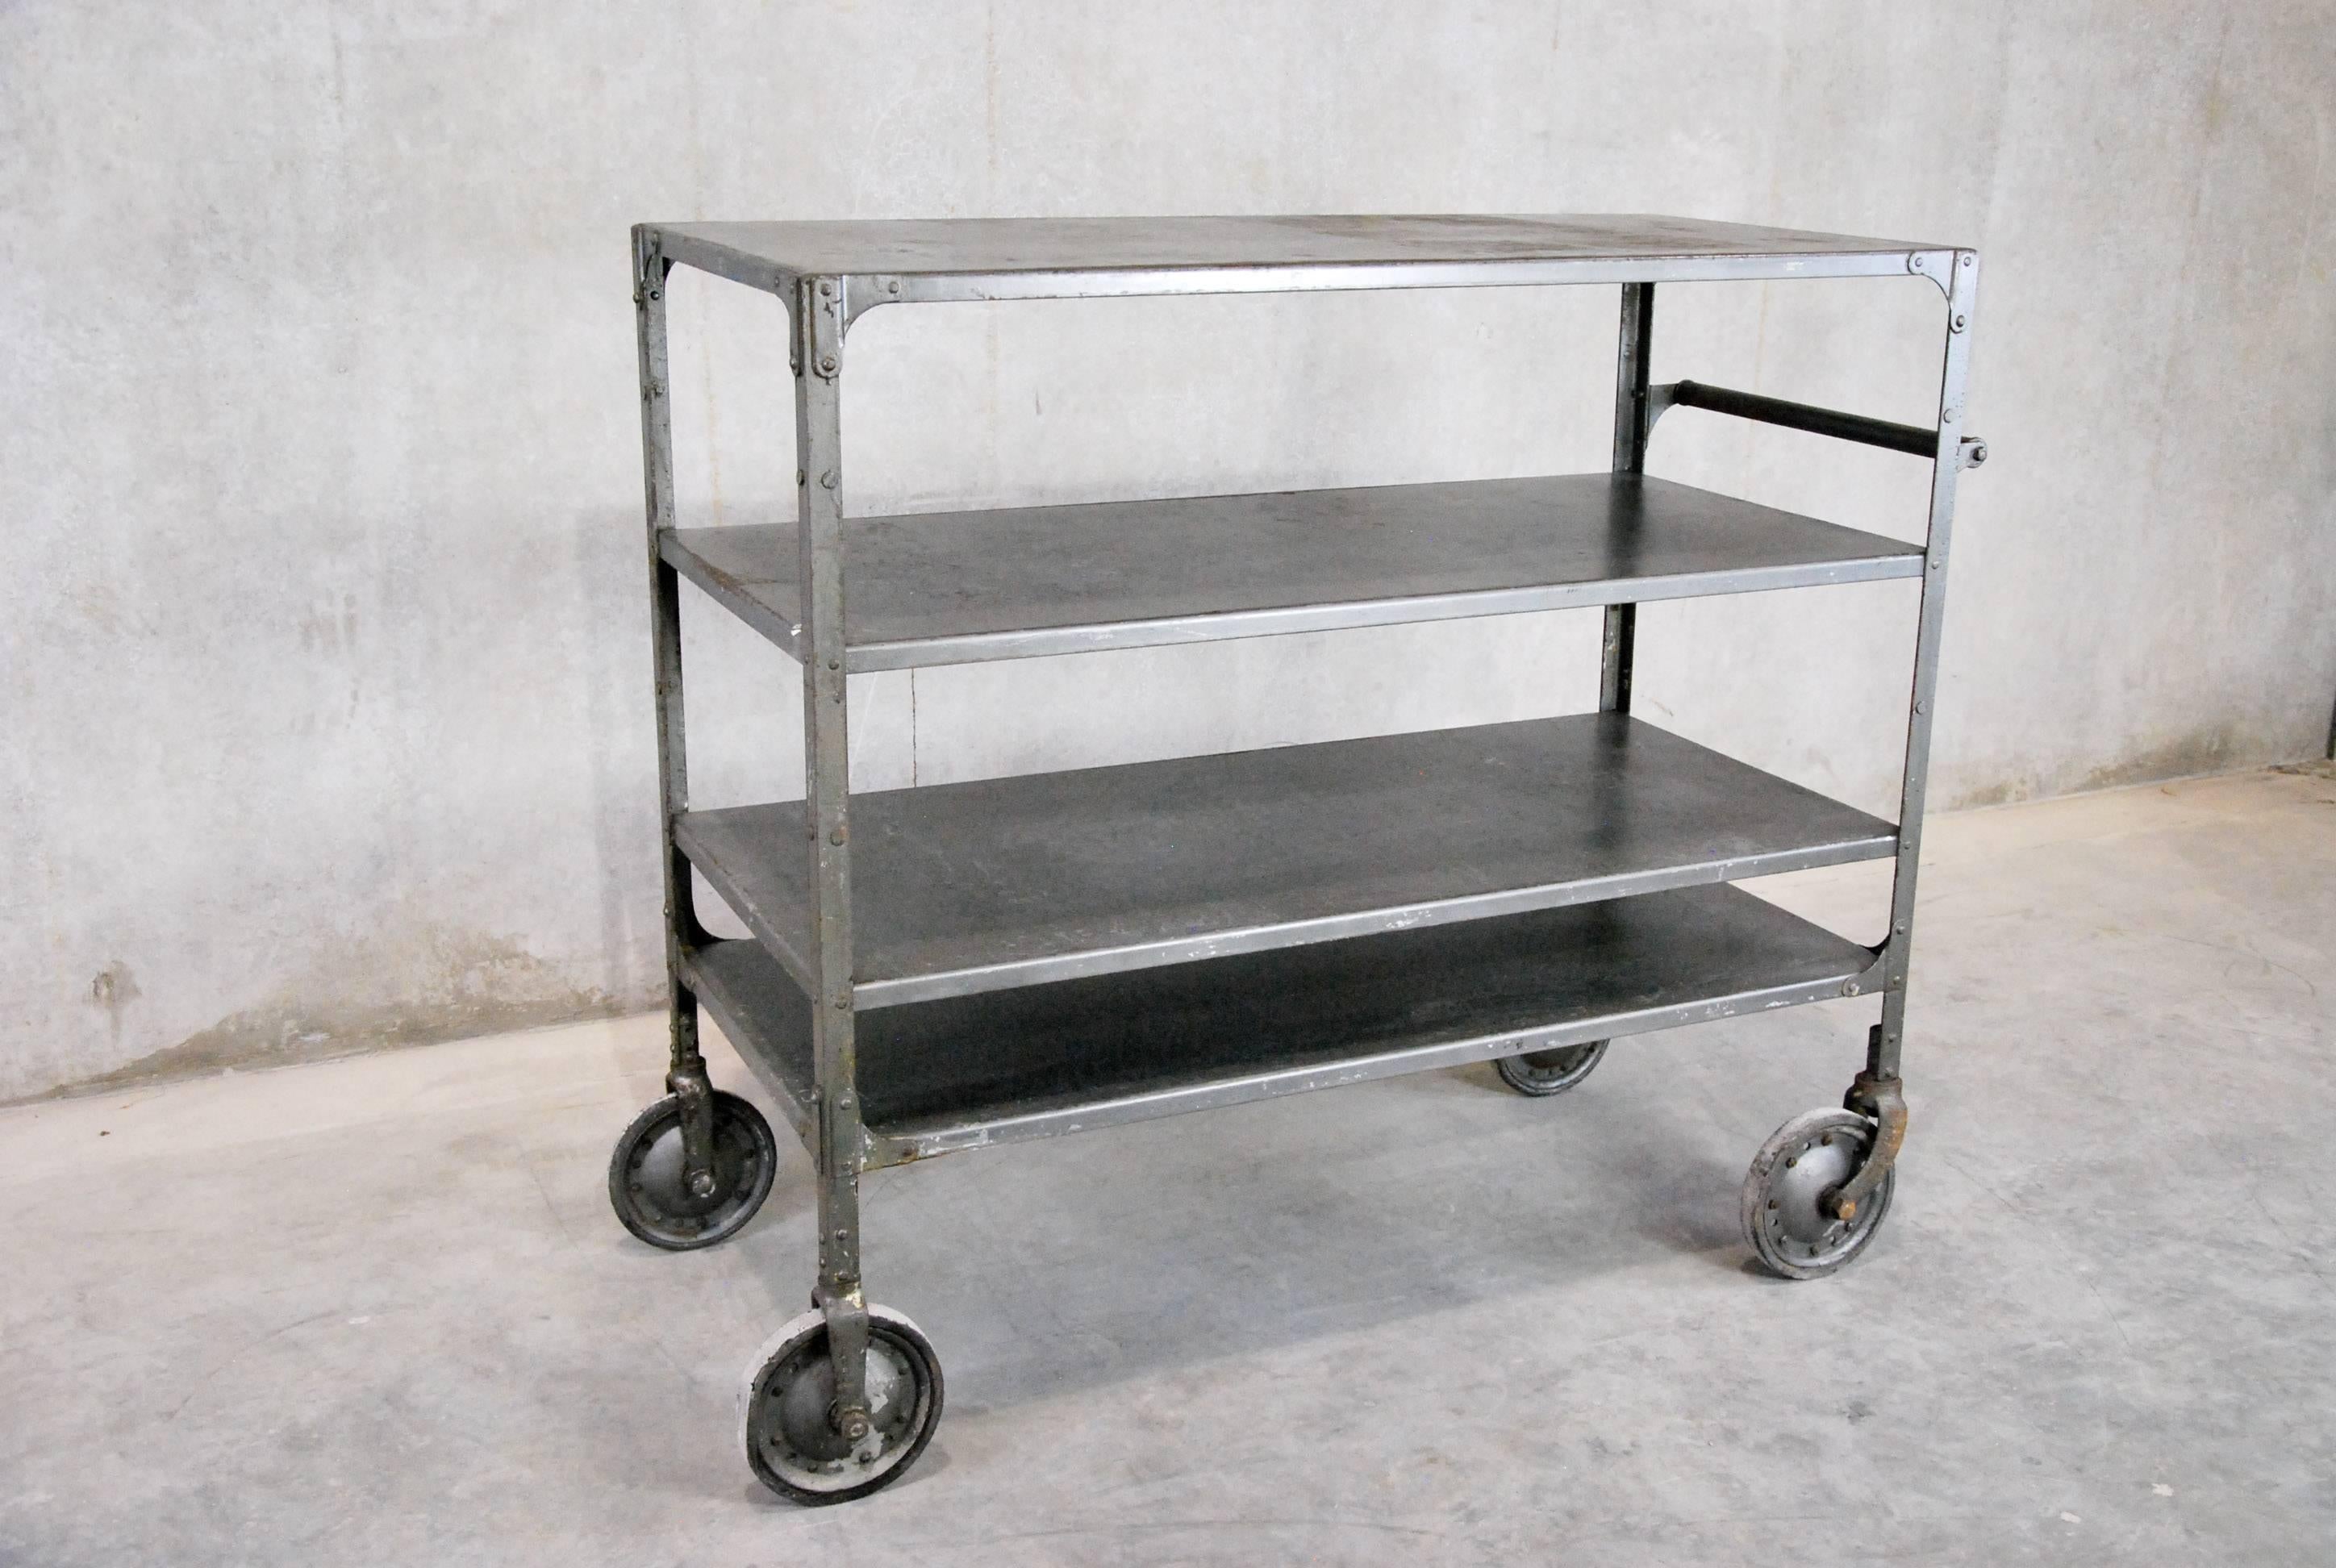 American made reinforced steel with multi-tiered shelving on factory wheels.
Piece is in original old finish and with push handle.

Found in a factory in Pacific North West.
 